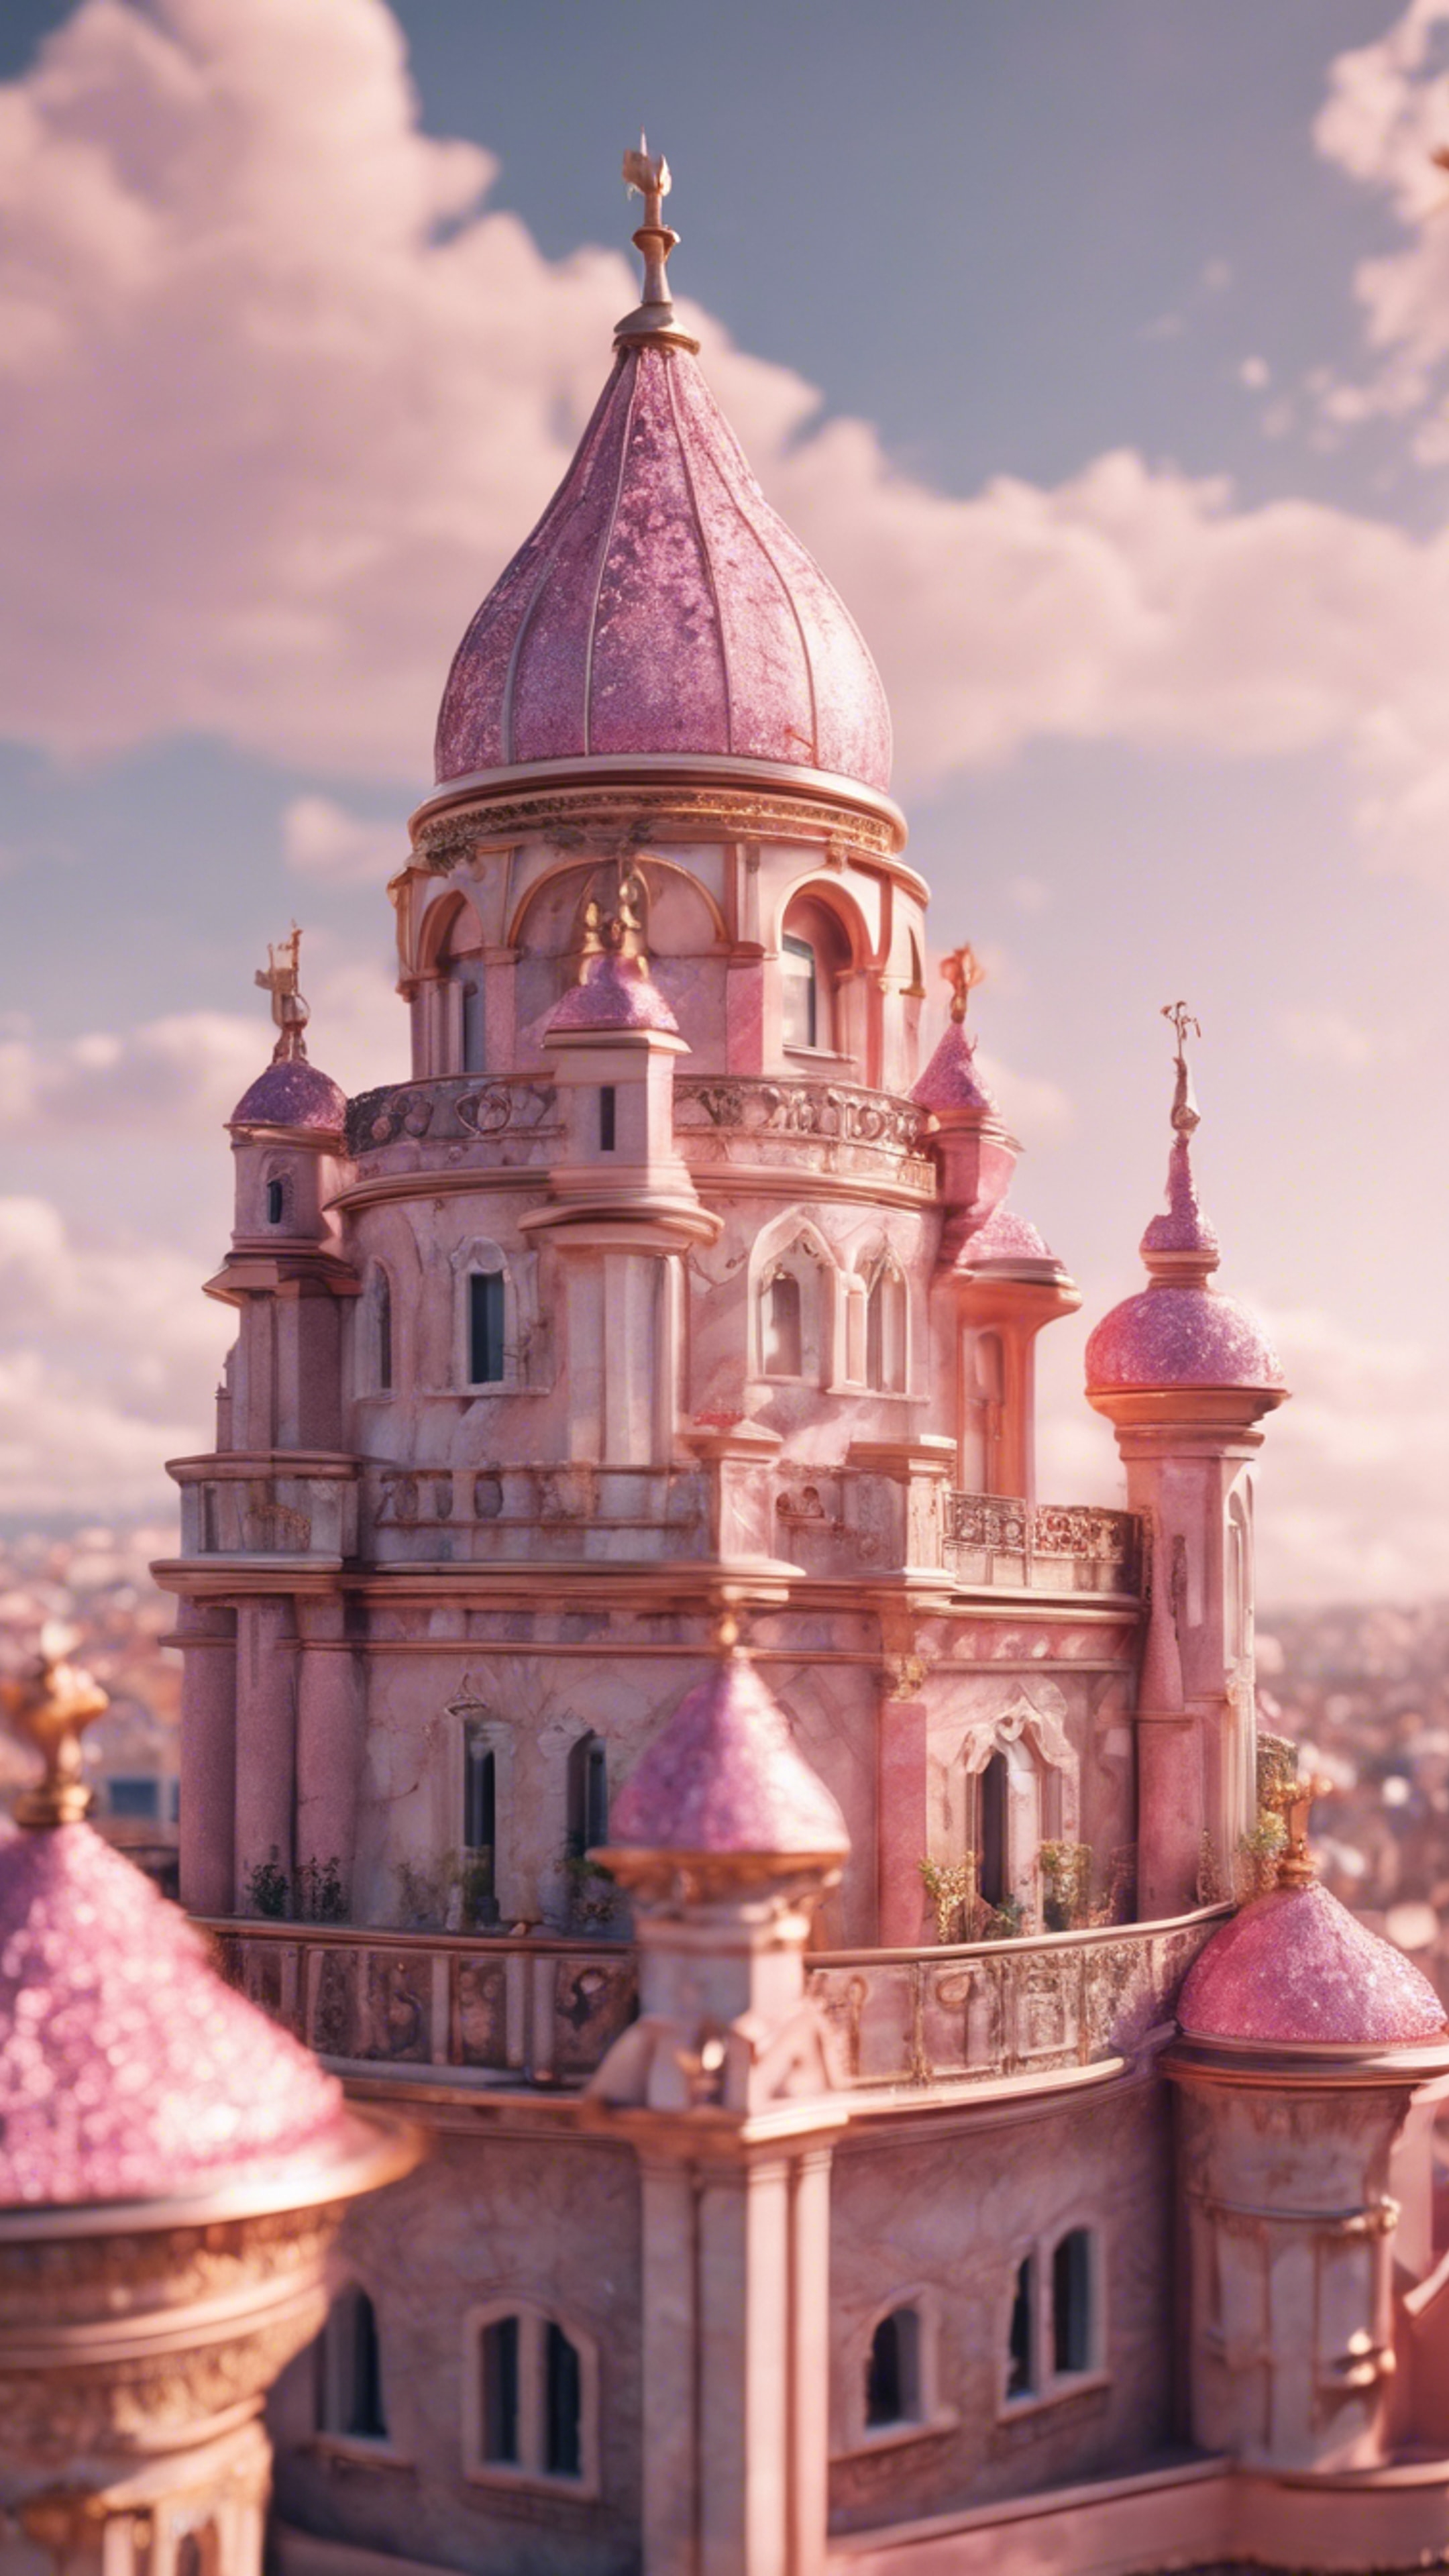 An ornate pink marble castle with glimmering golden rooftops during a sunny afternoon. Tapeta na zeď[39cdf807c12f4b9c8dd2]